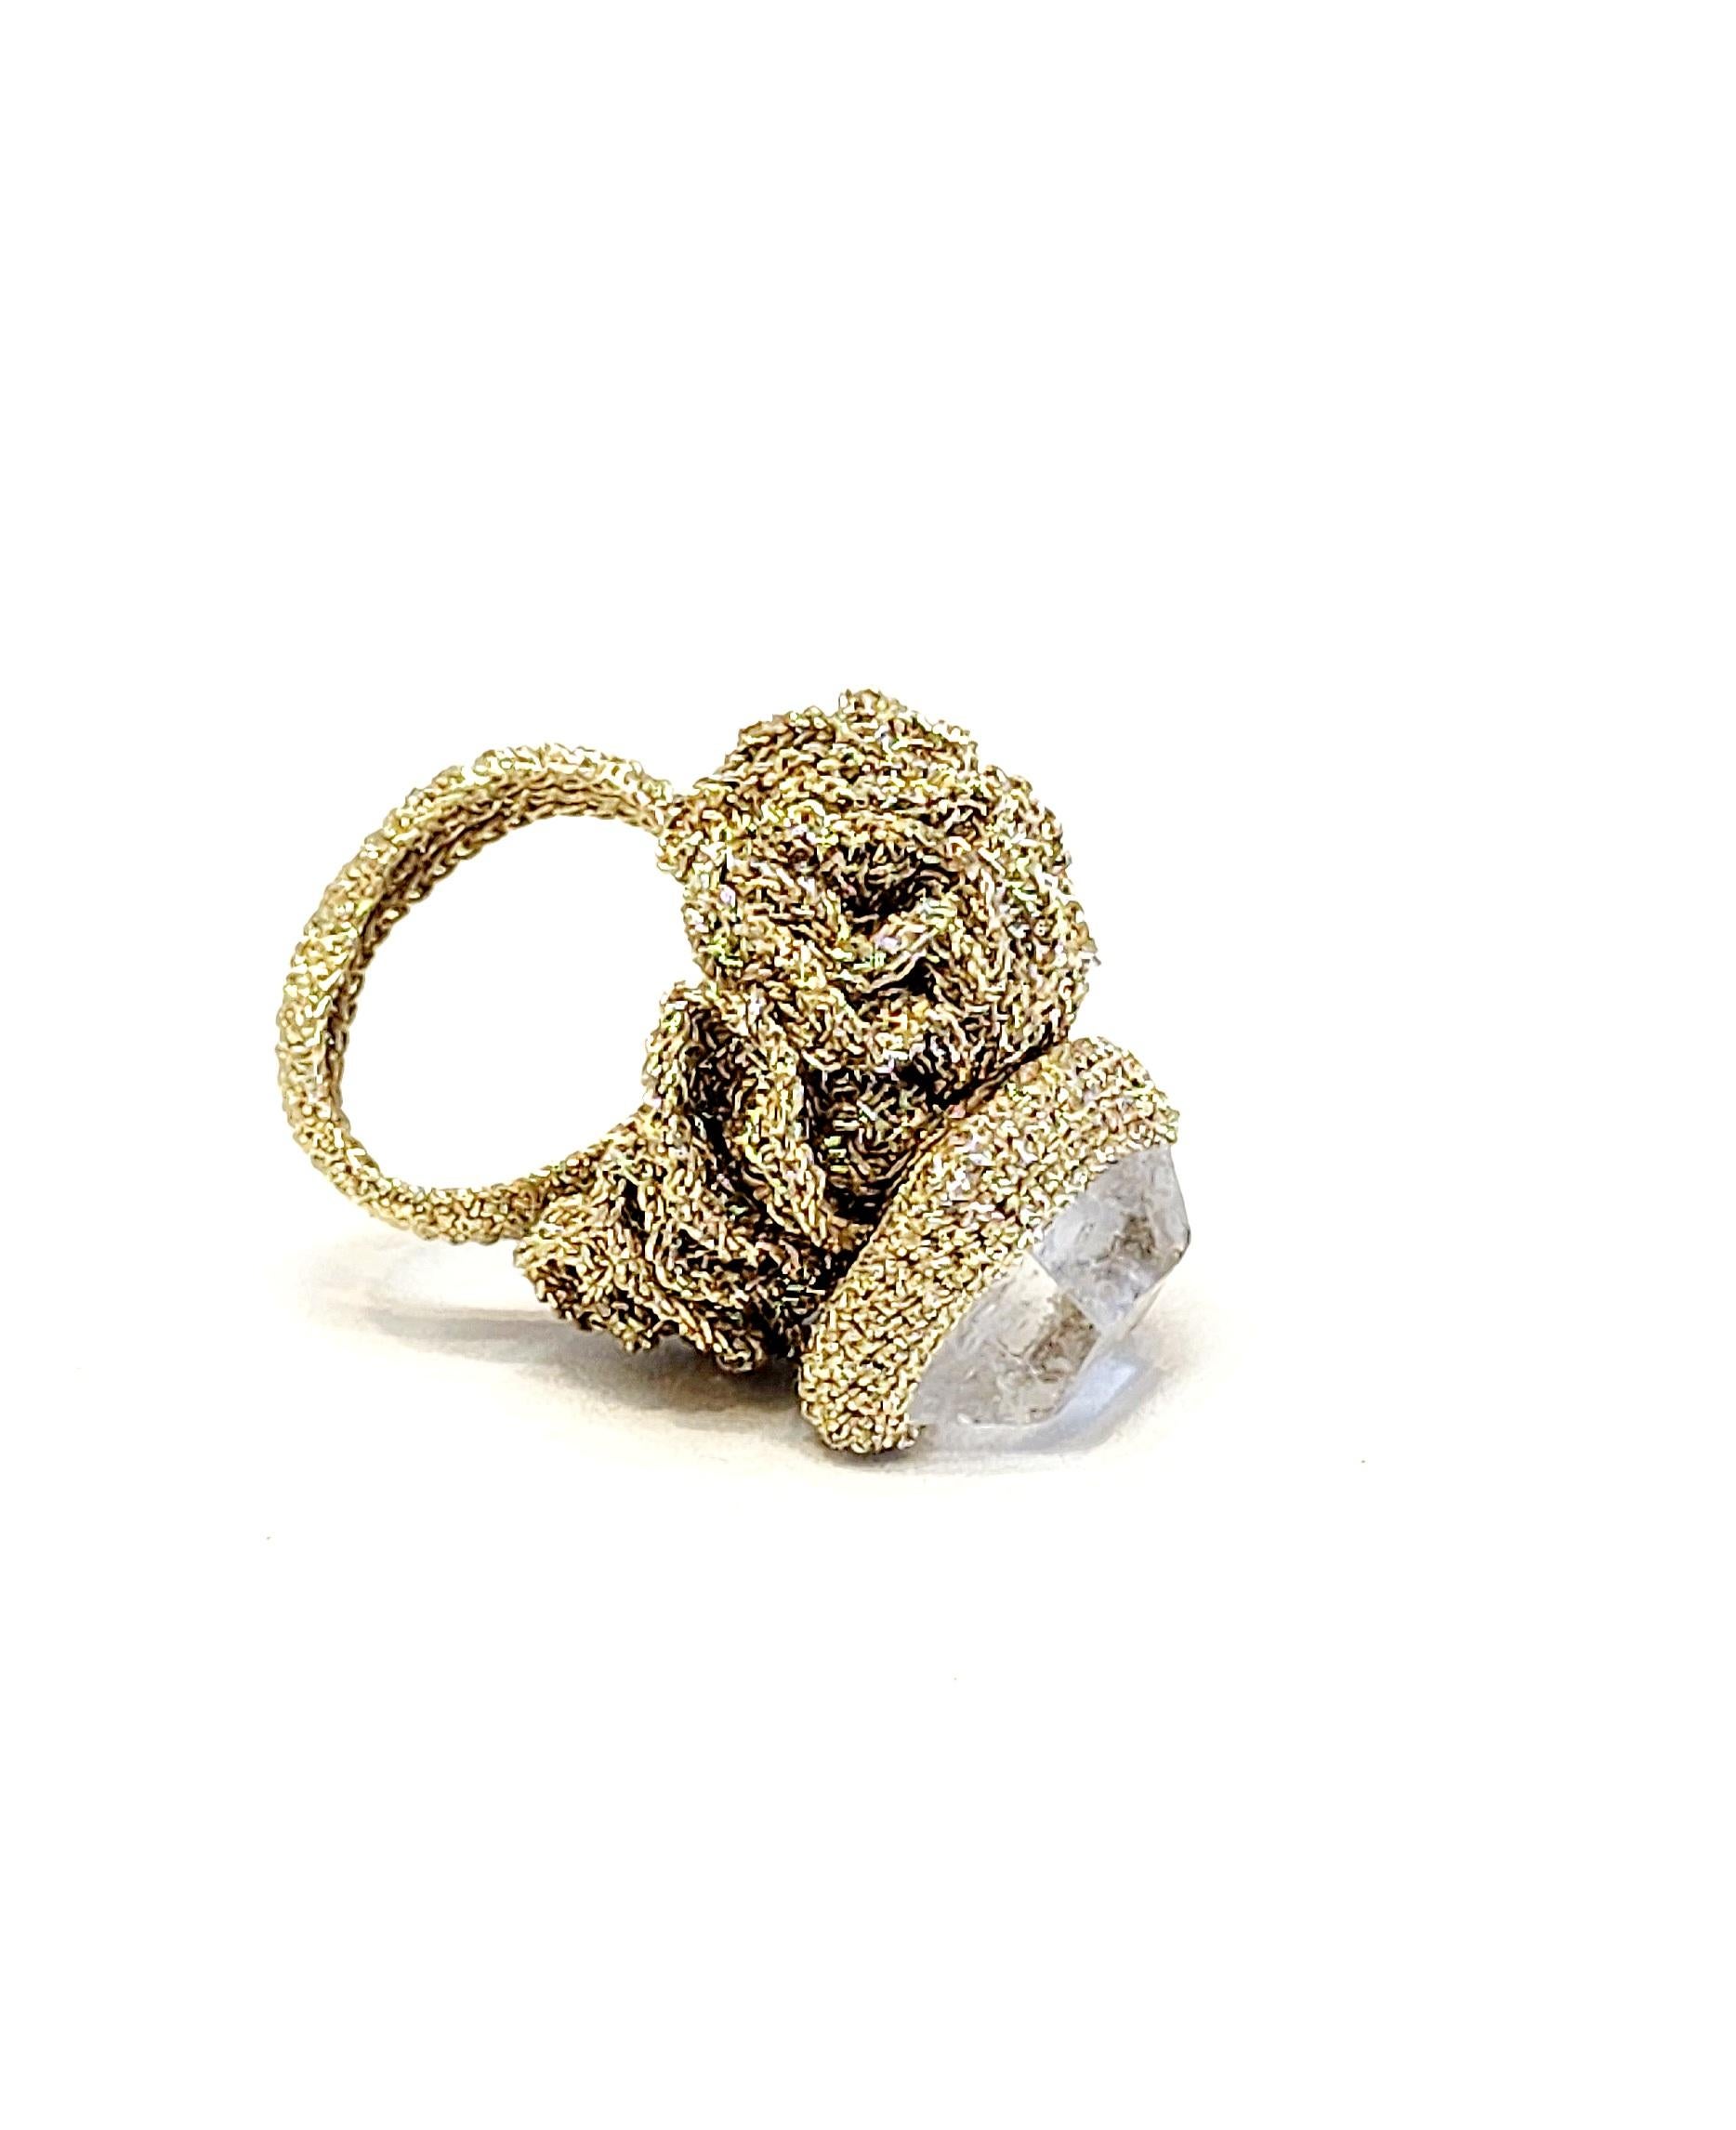 Rough Cut Golden Thread Crochet Ring Crystal Clear Stone For Sale